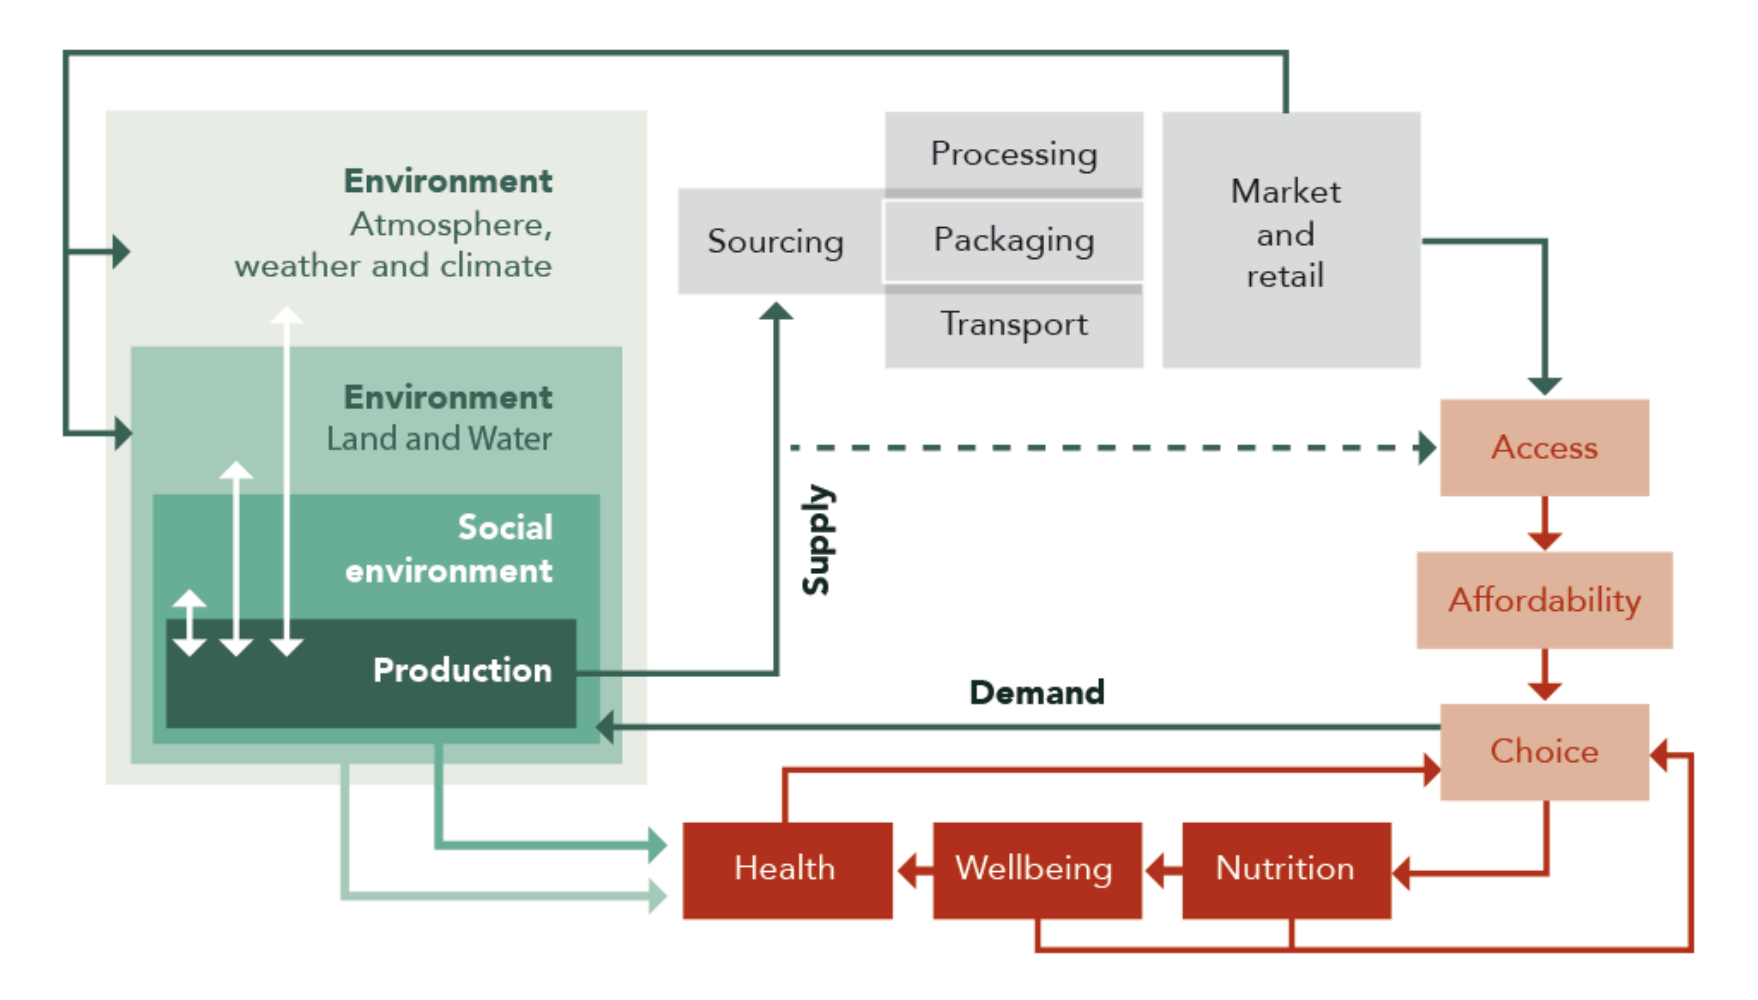 Figure 2: A food system diagram showing some social and environmental influences on the food system.